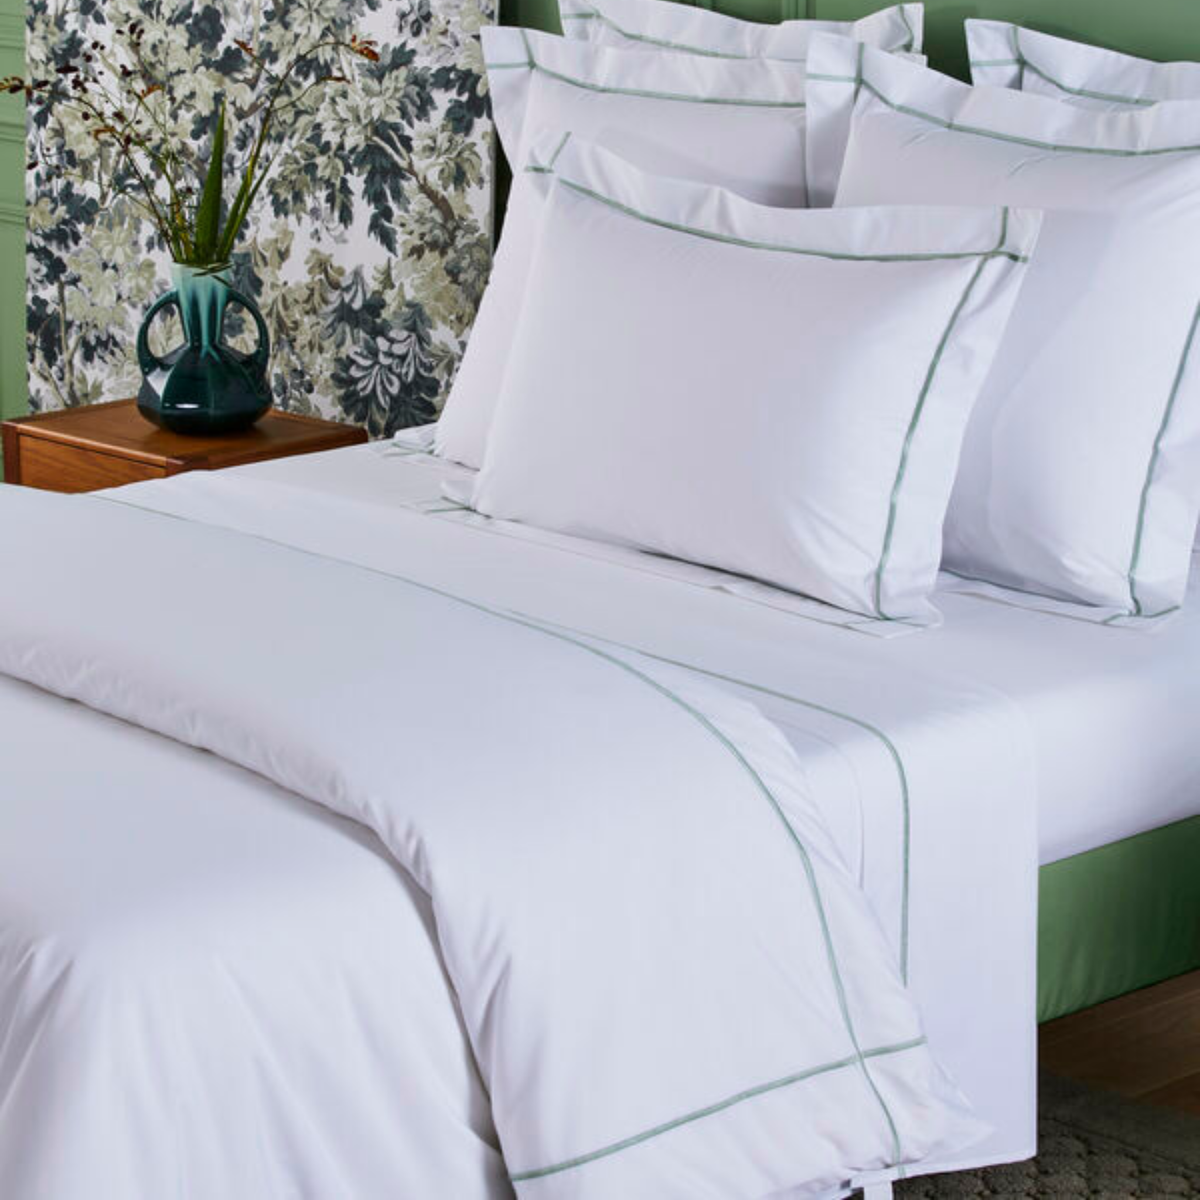 Side View of a Full Bed Dressed in Yves Delorme Athena Bedding in Veronese Color